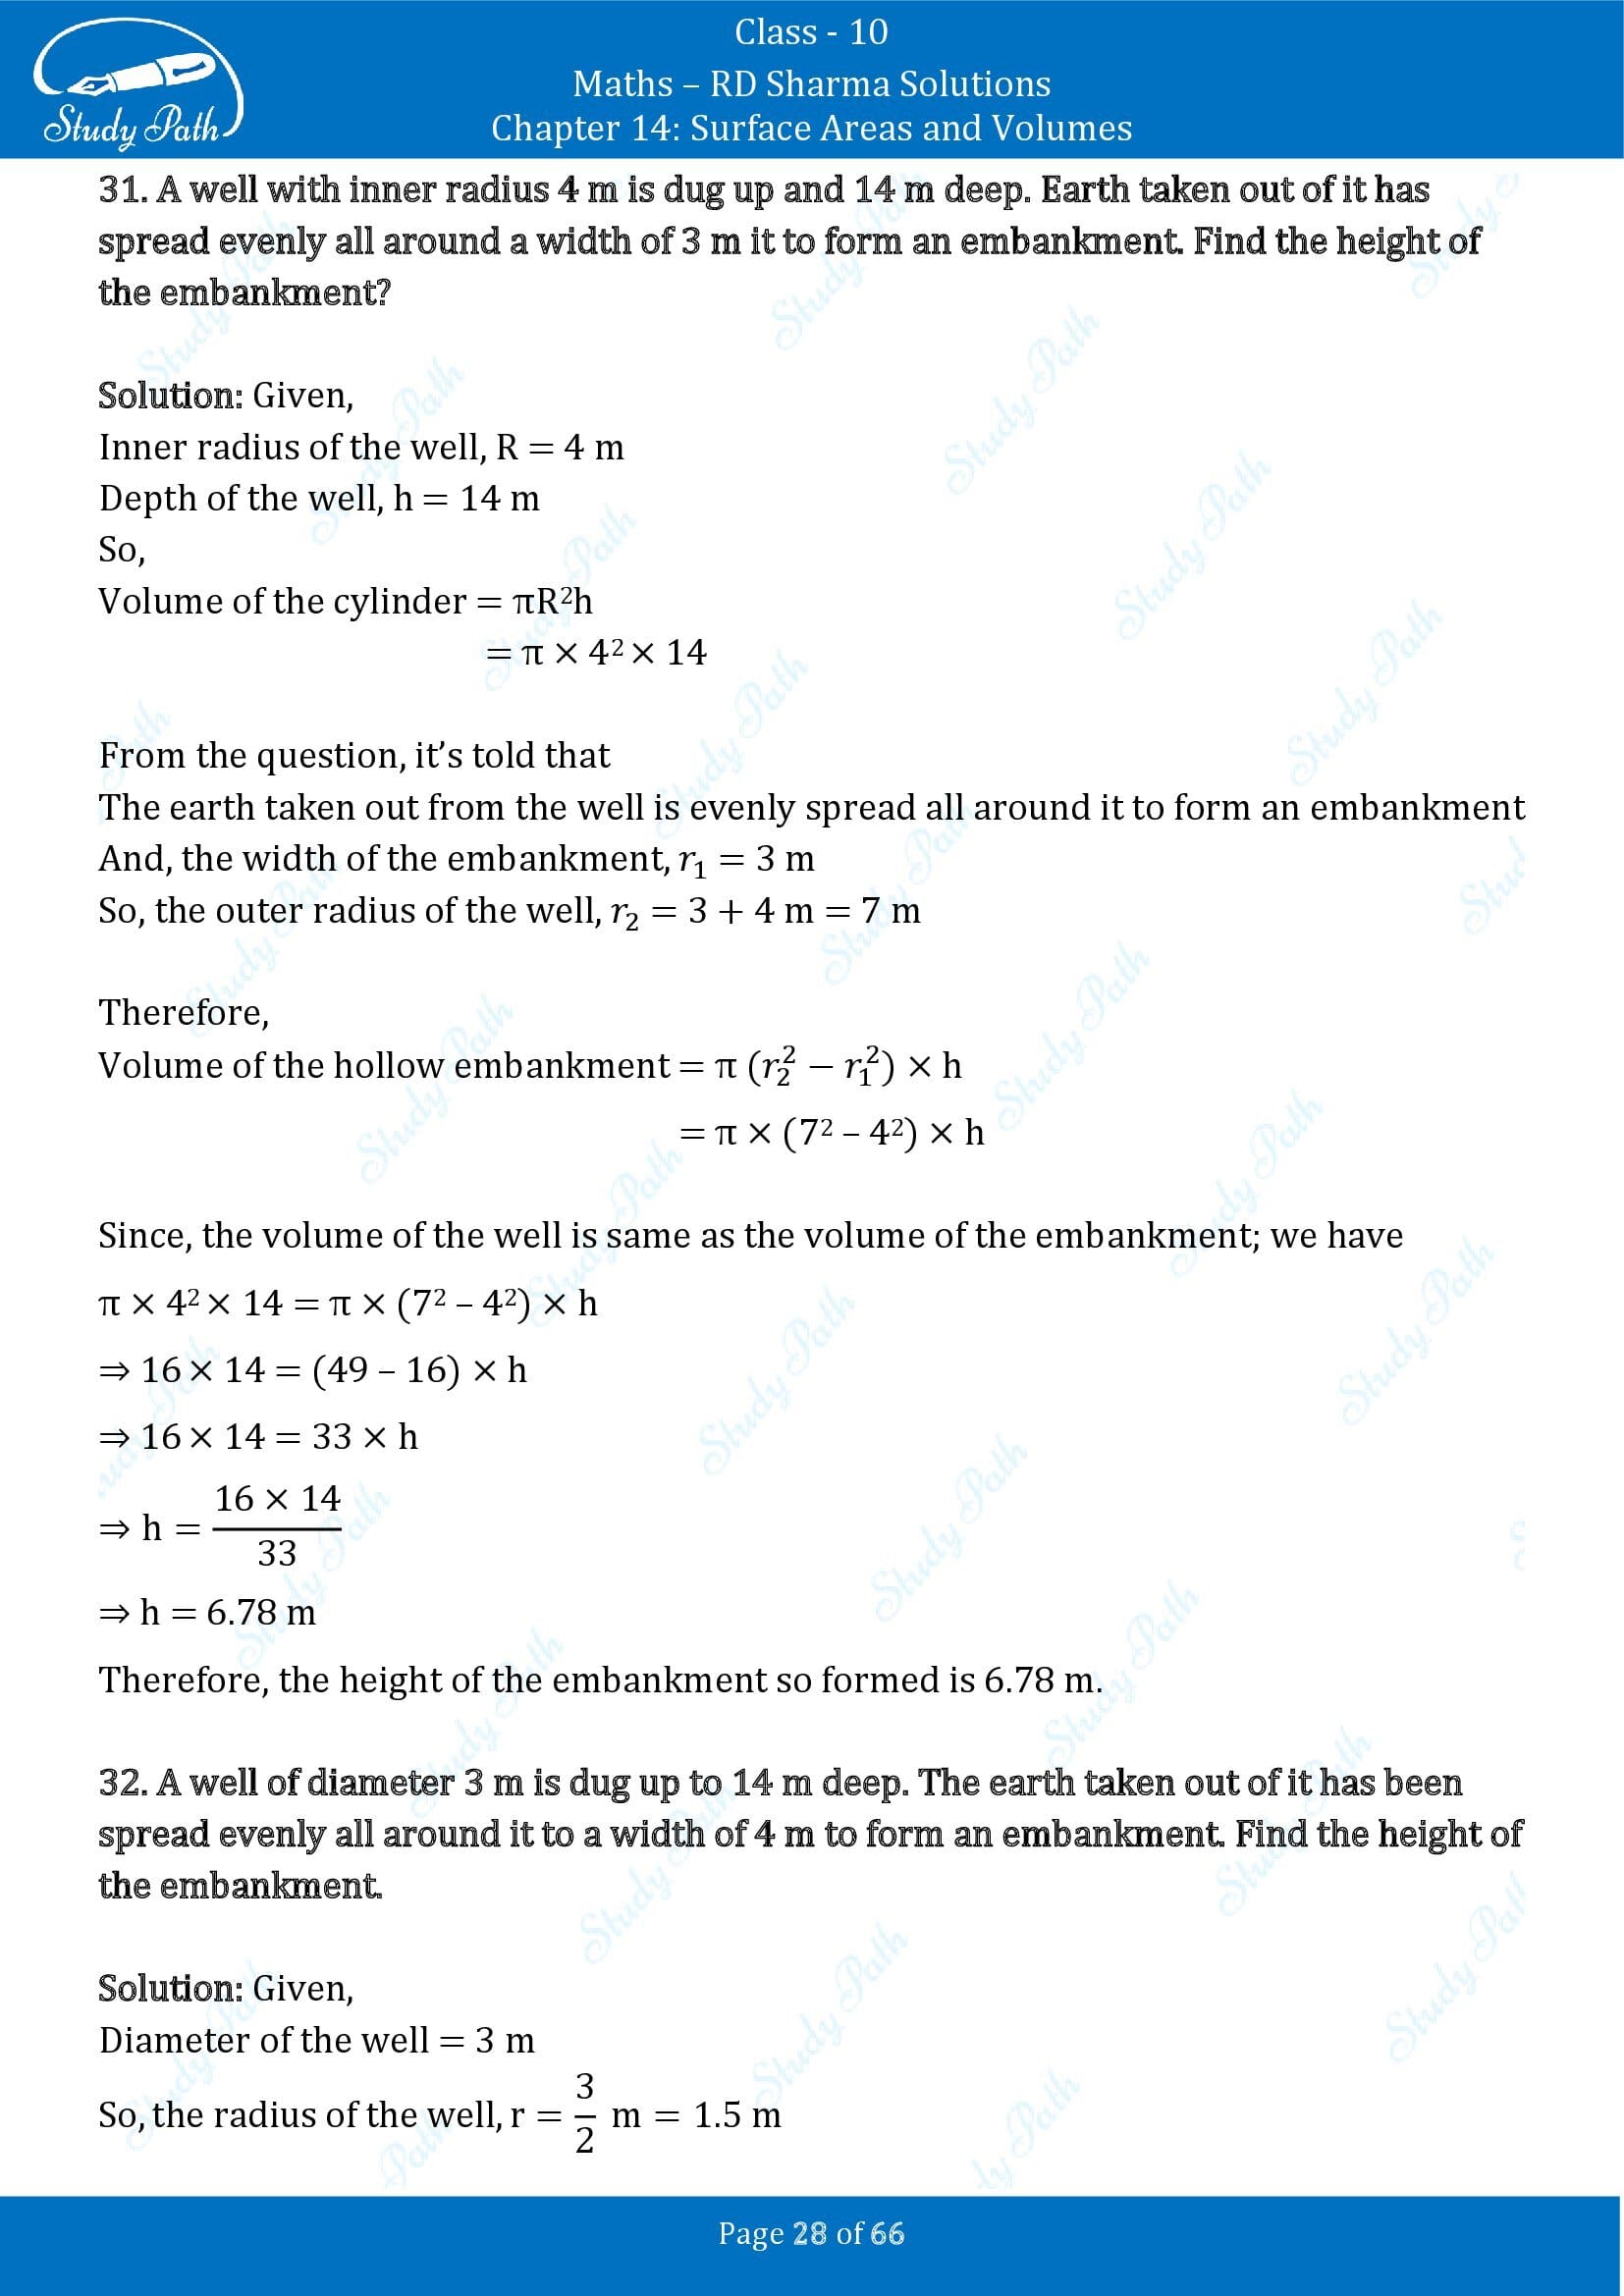 RD Sharma Solutions Class 10 Chapter 14 Surface Areas and Volumes Exercise 14.1 00028